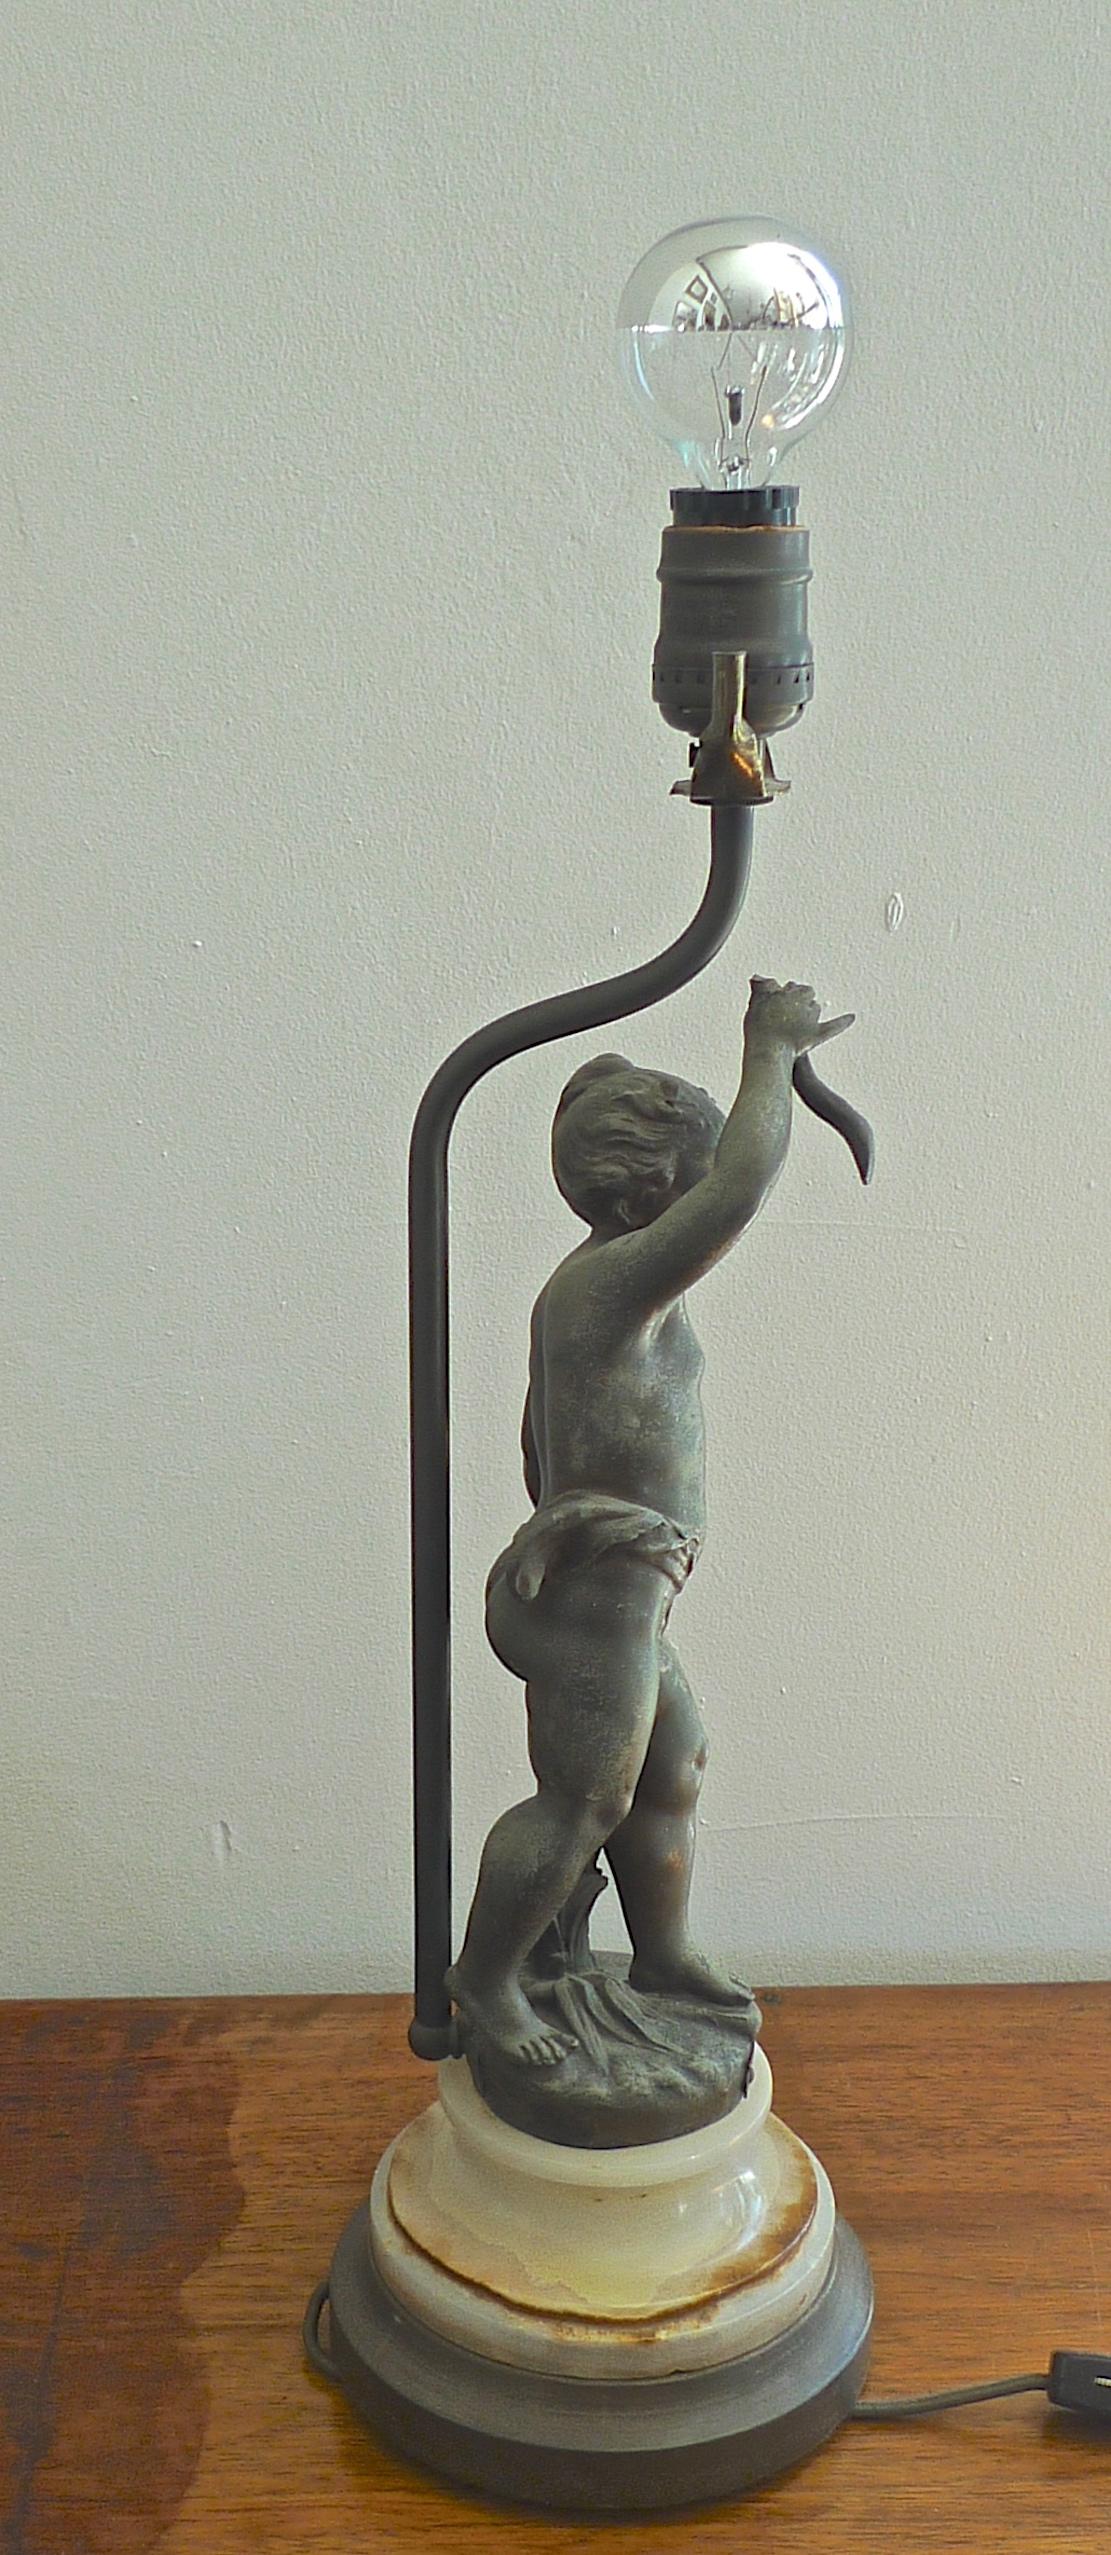 French 19th century bronze statuette on marble stand by Ernest Justin Ferrand converted to a desk lamp.